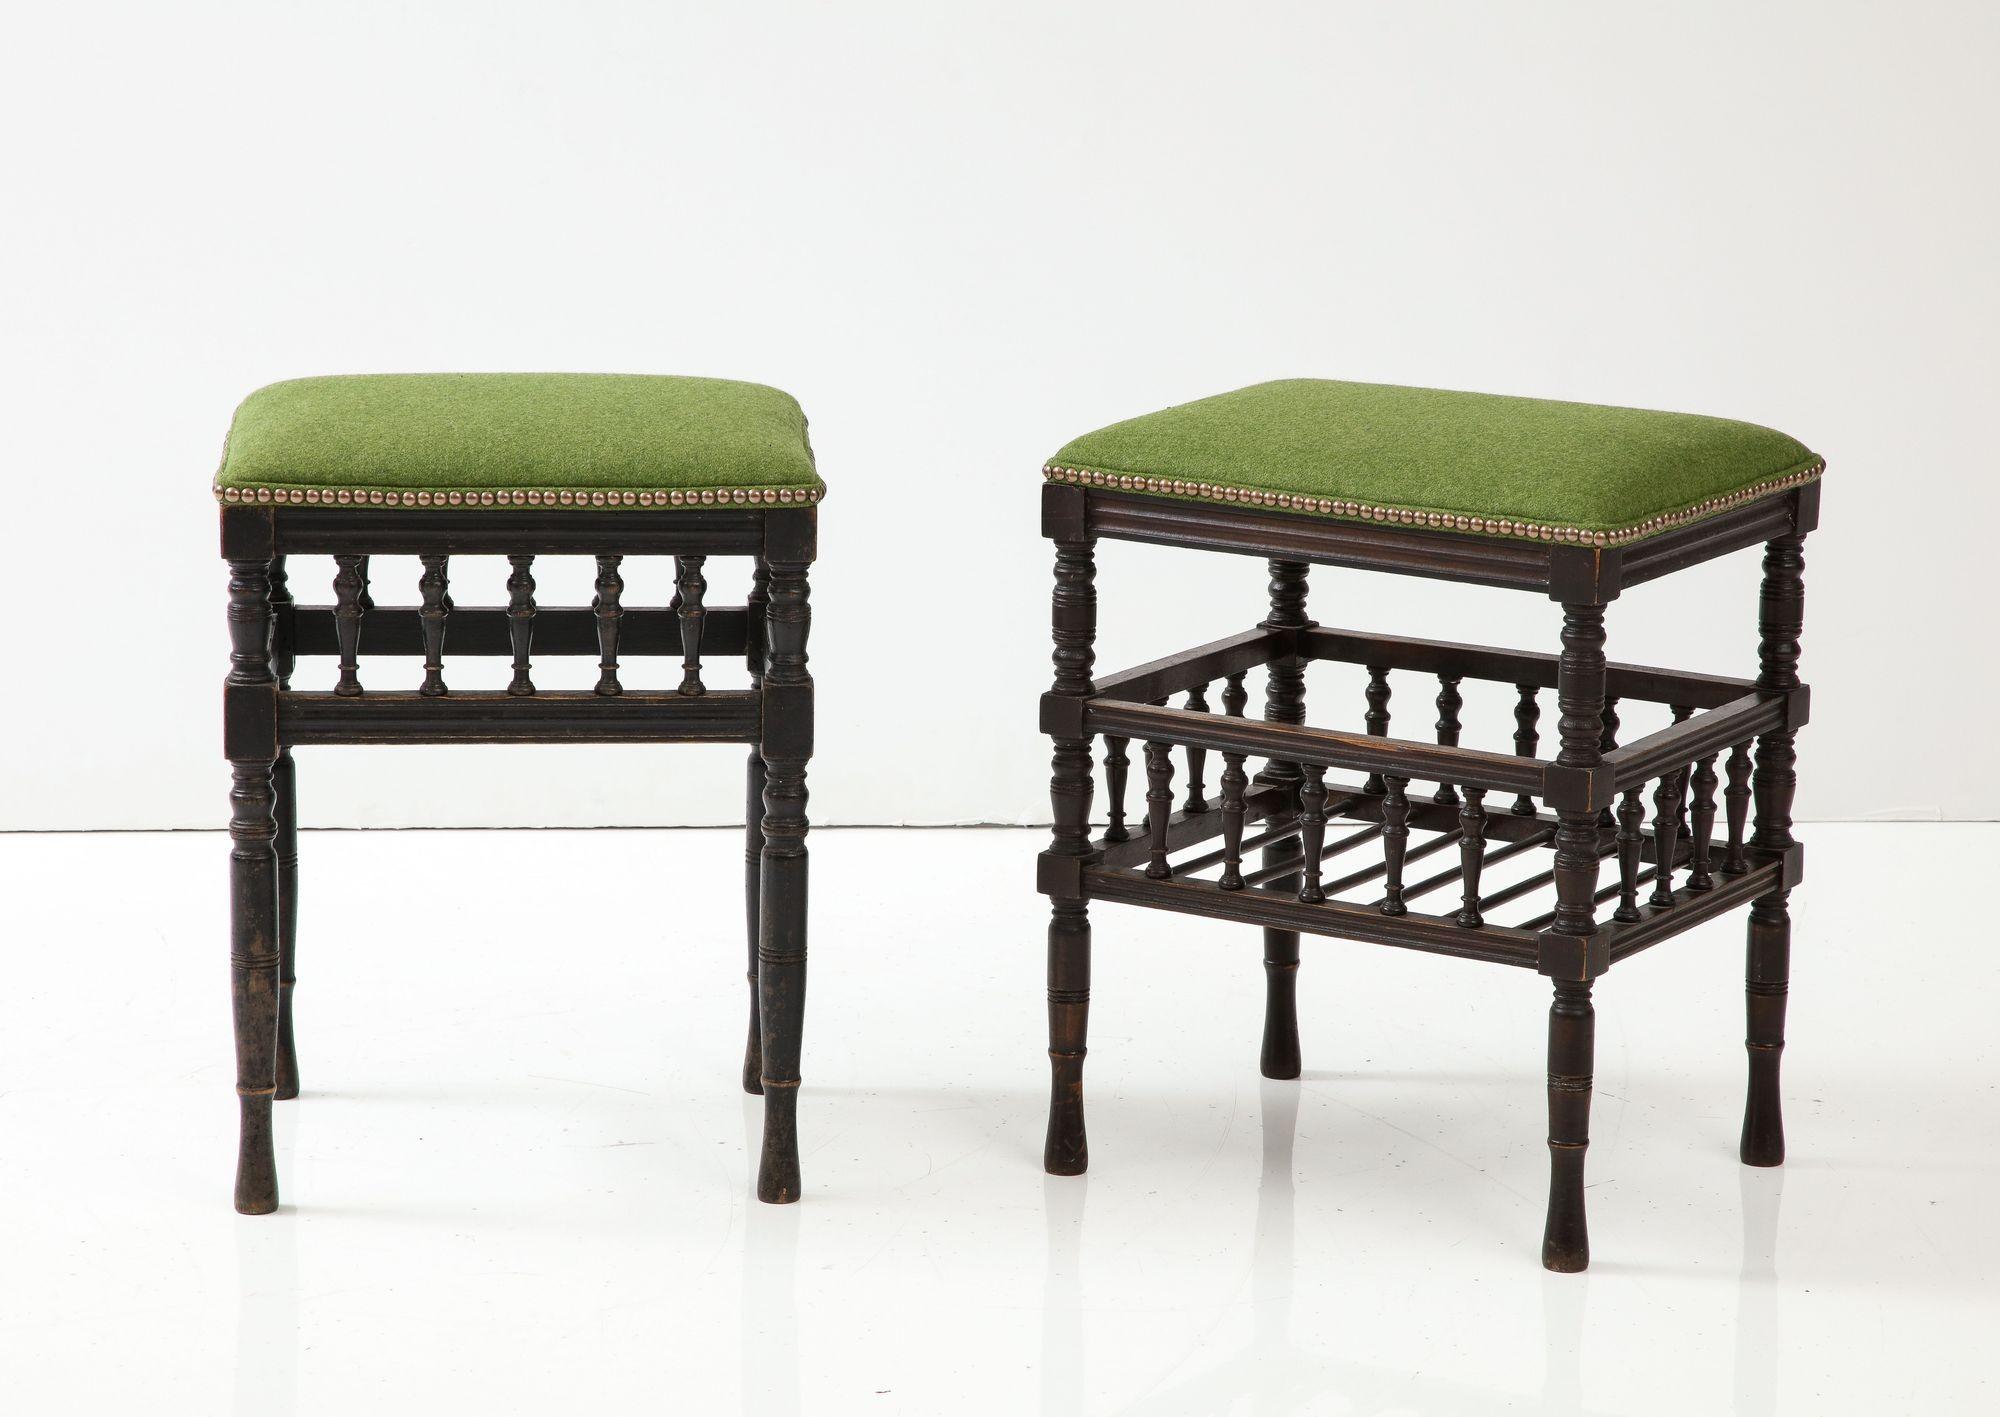 Aesthetic Movement Scottish Wool Upholstered Stools For Sale